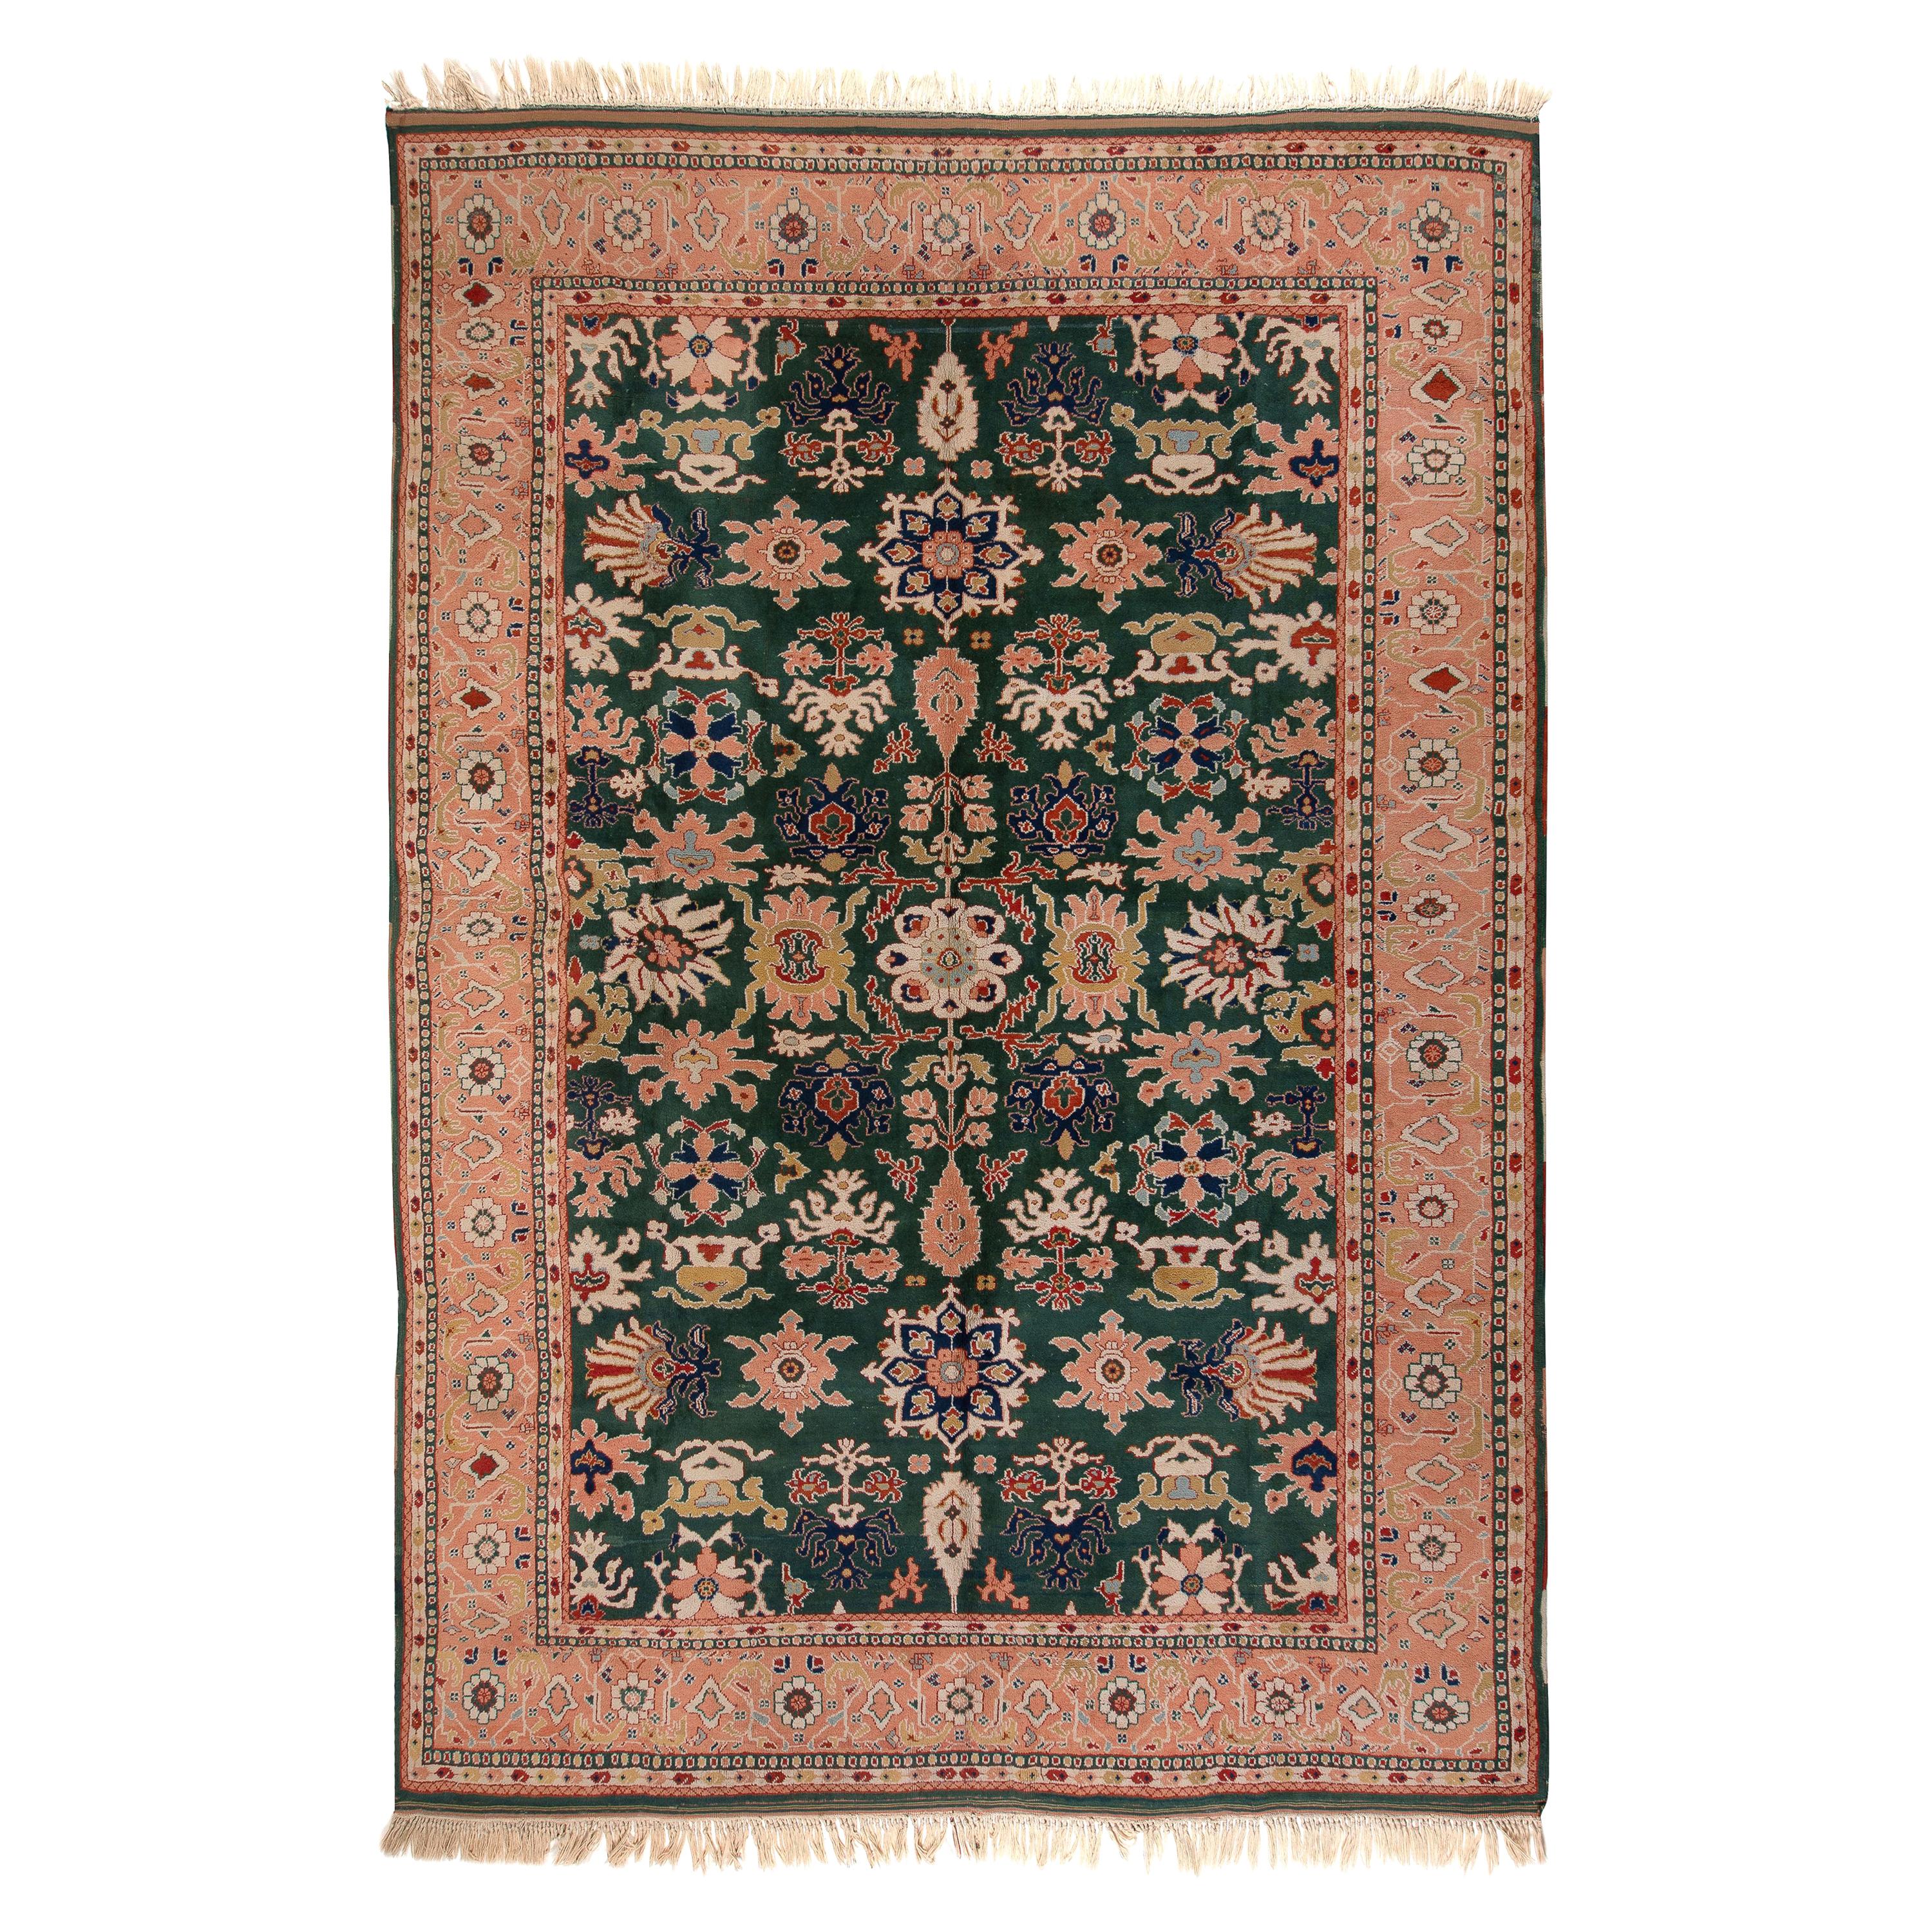 8.4x10.2 Ft Emerald Green and Peach Turkish Rug, 100% Wool & Natural Dyes